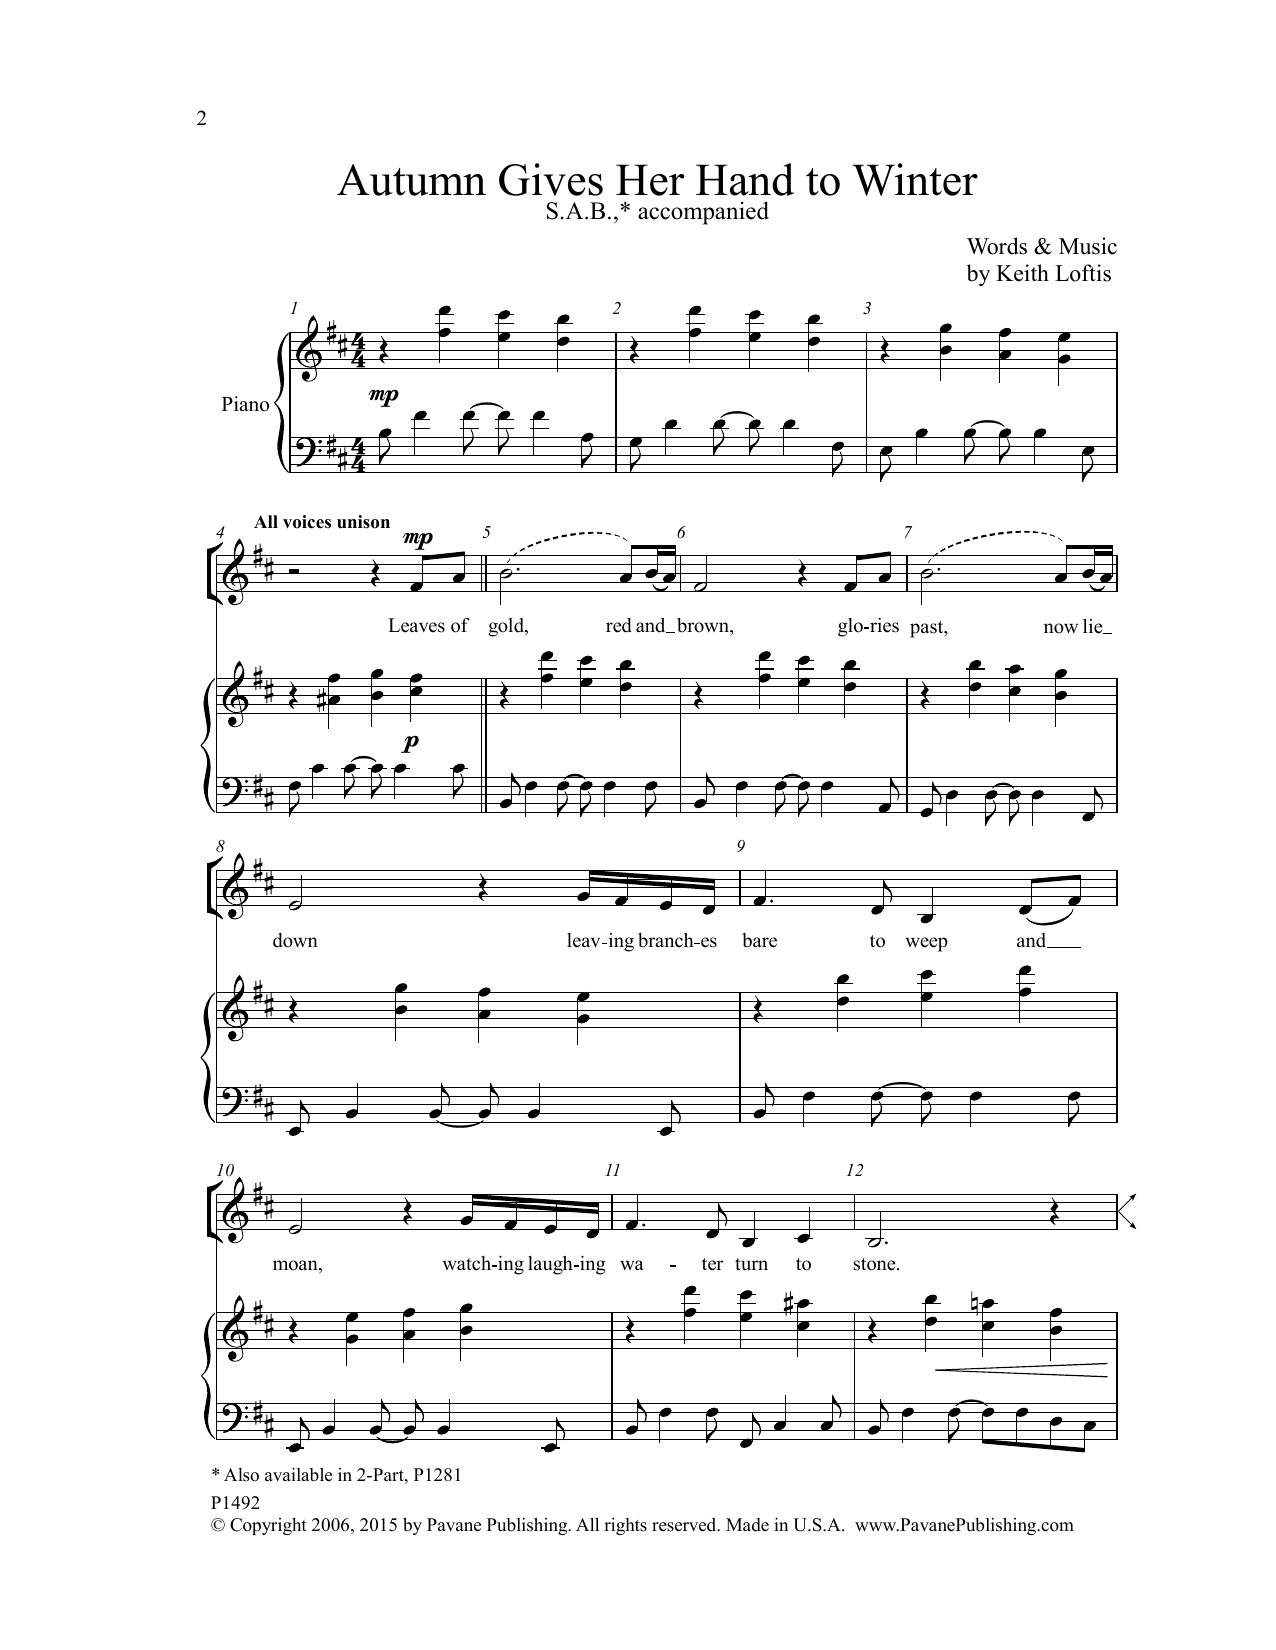 Download Keith Loftis Autumn Gives Her Hand to Winter Sheet Music